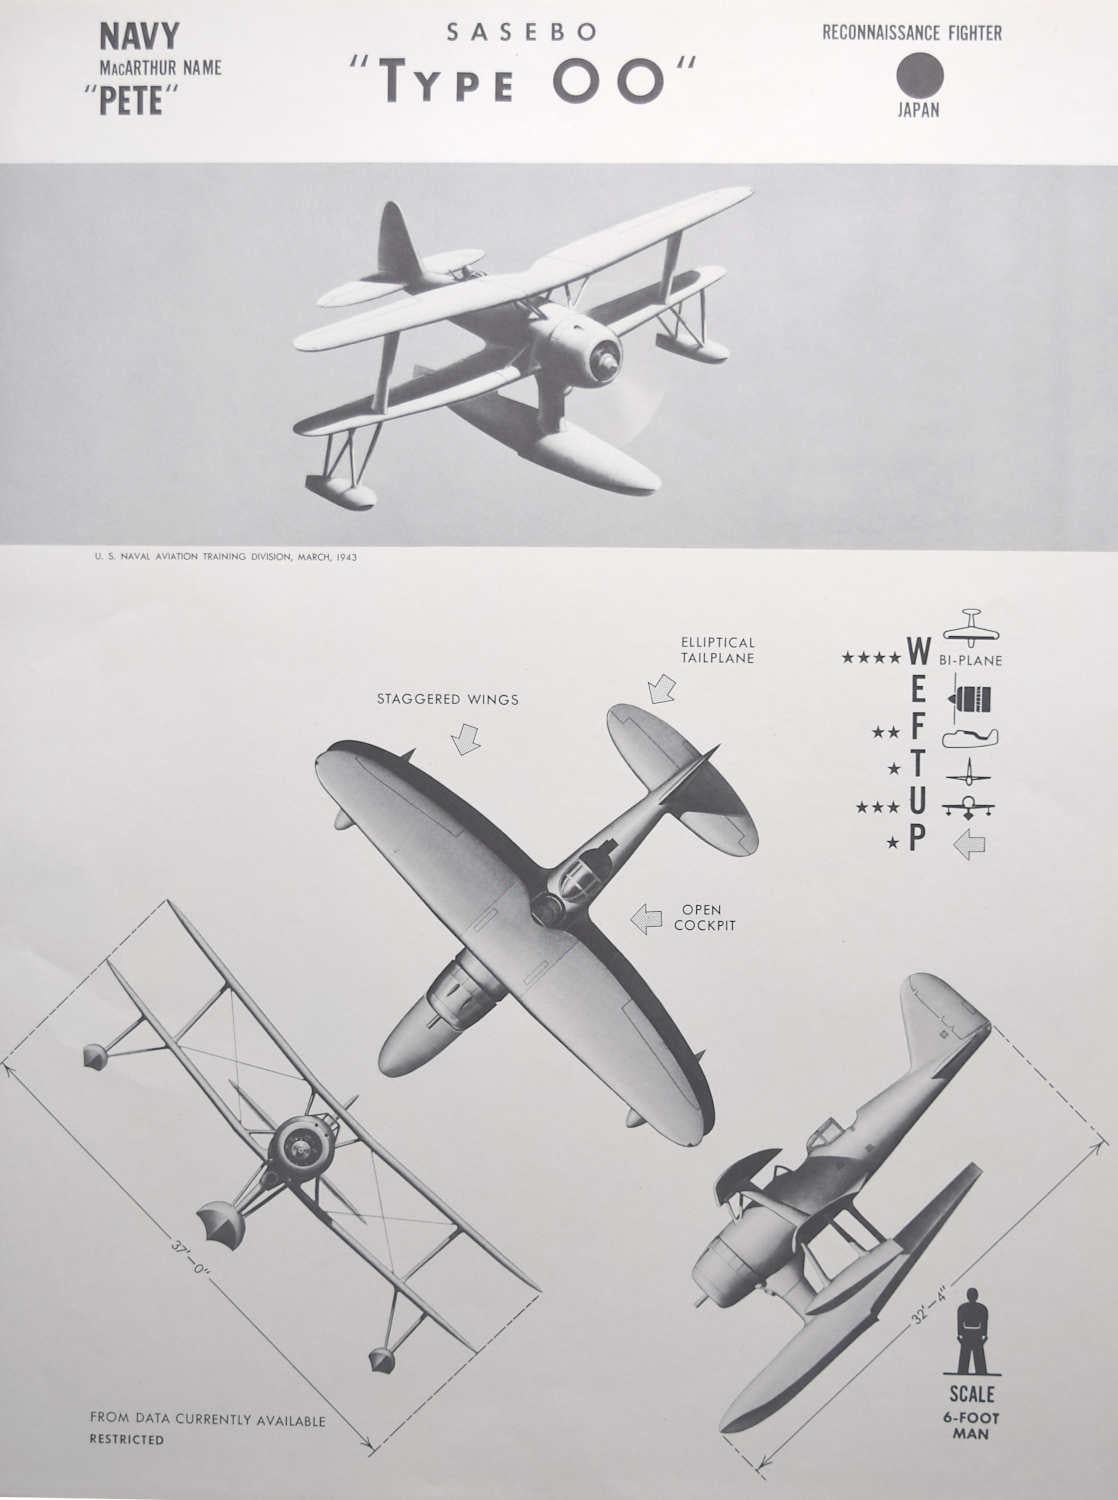 1943 Sasebo "Type 00" Japanese survey fighter plane identification poster WW2 - Print by Unknown